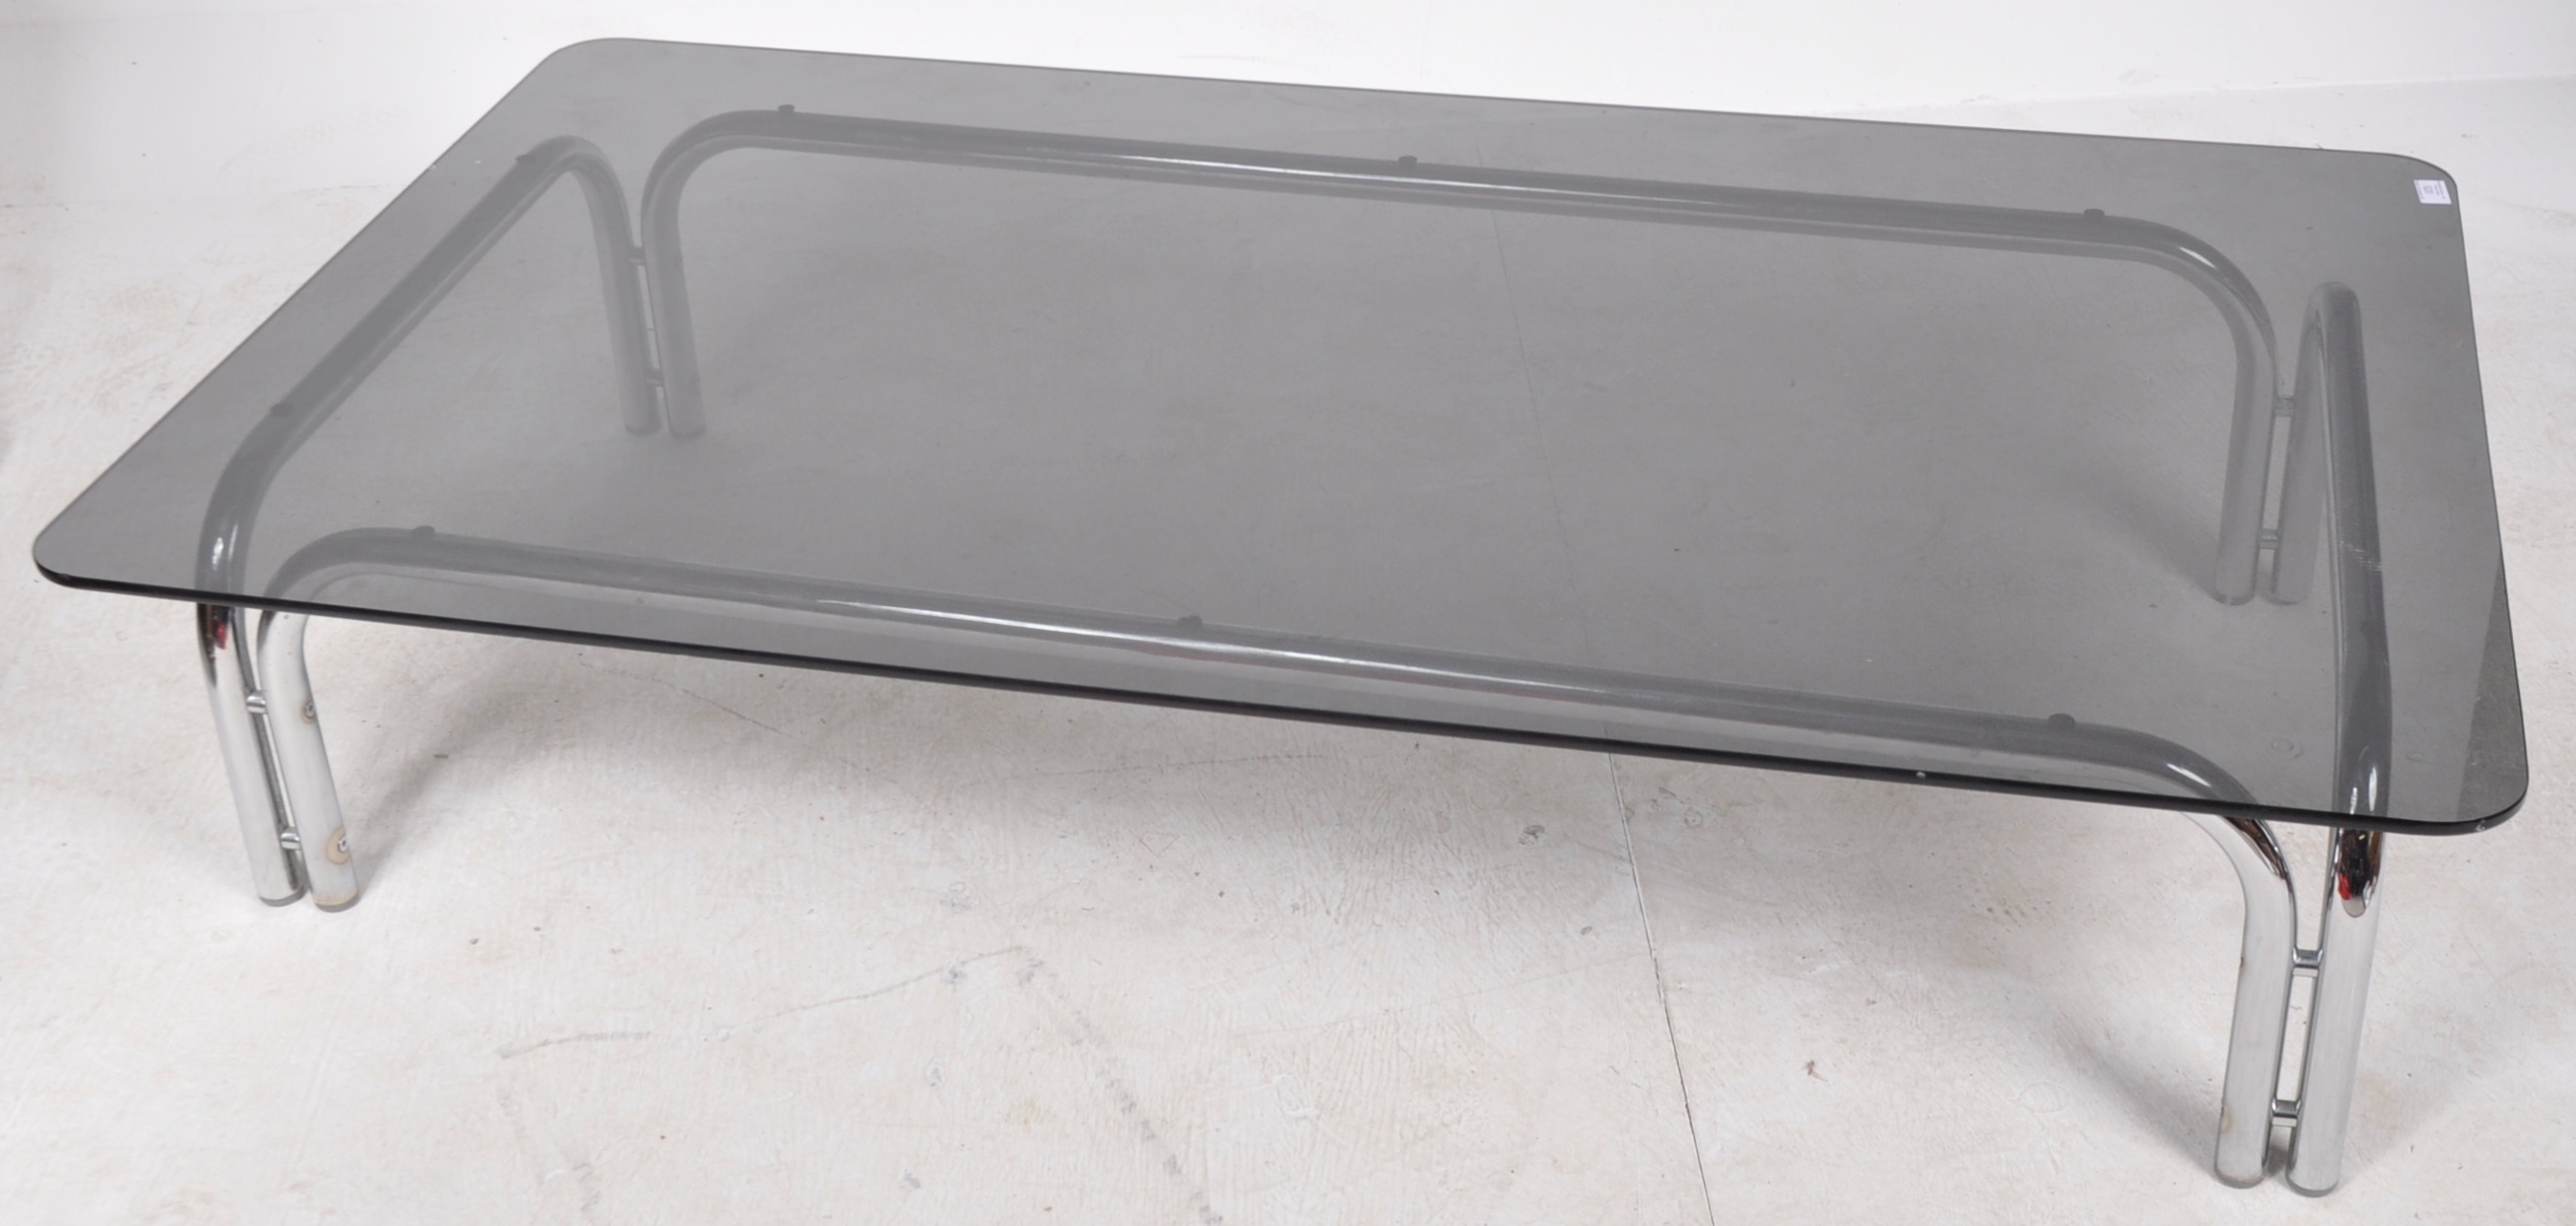 HEALS OF LONDON - LARGE CHROME AND GLASS TOPPED COFFEE TABLE - Image 4 of 6